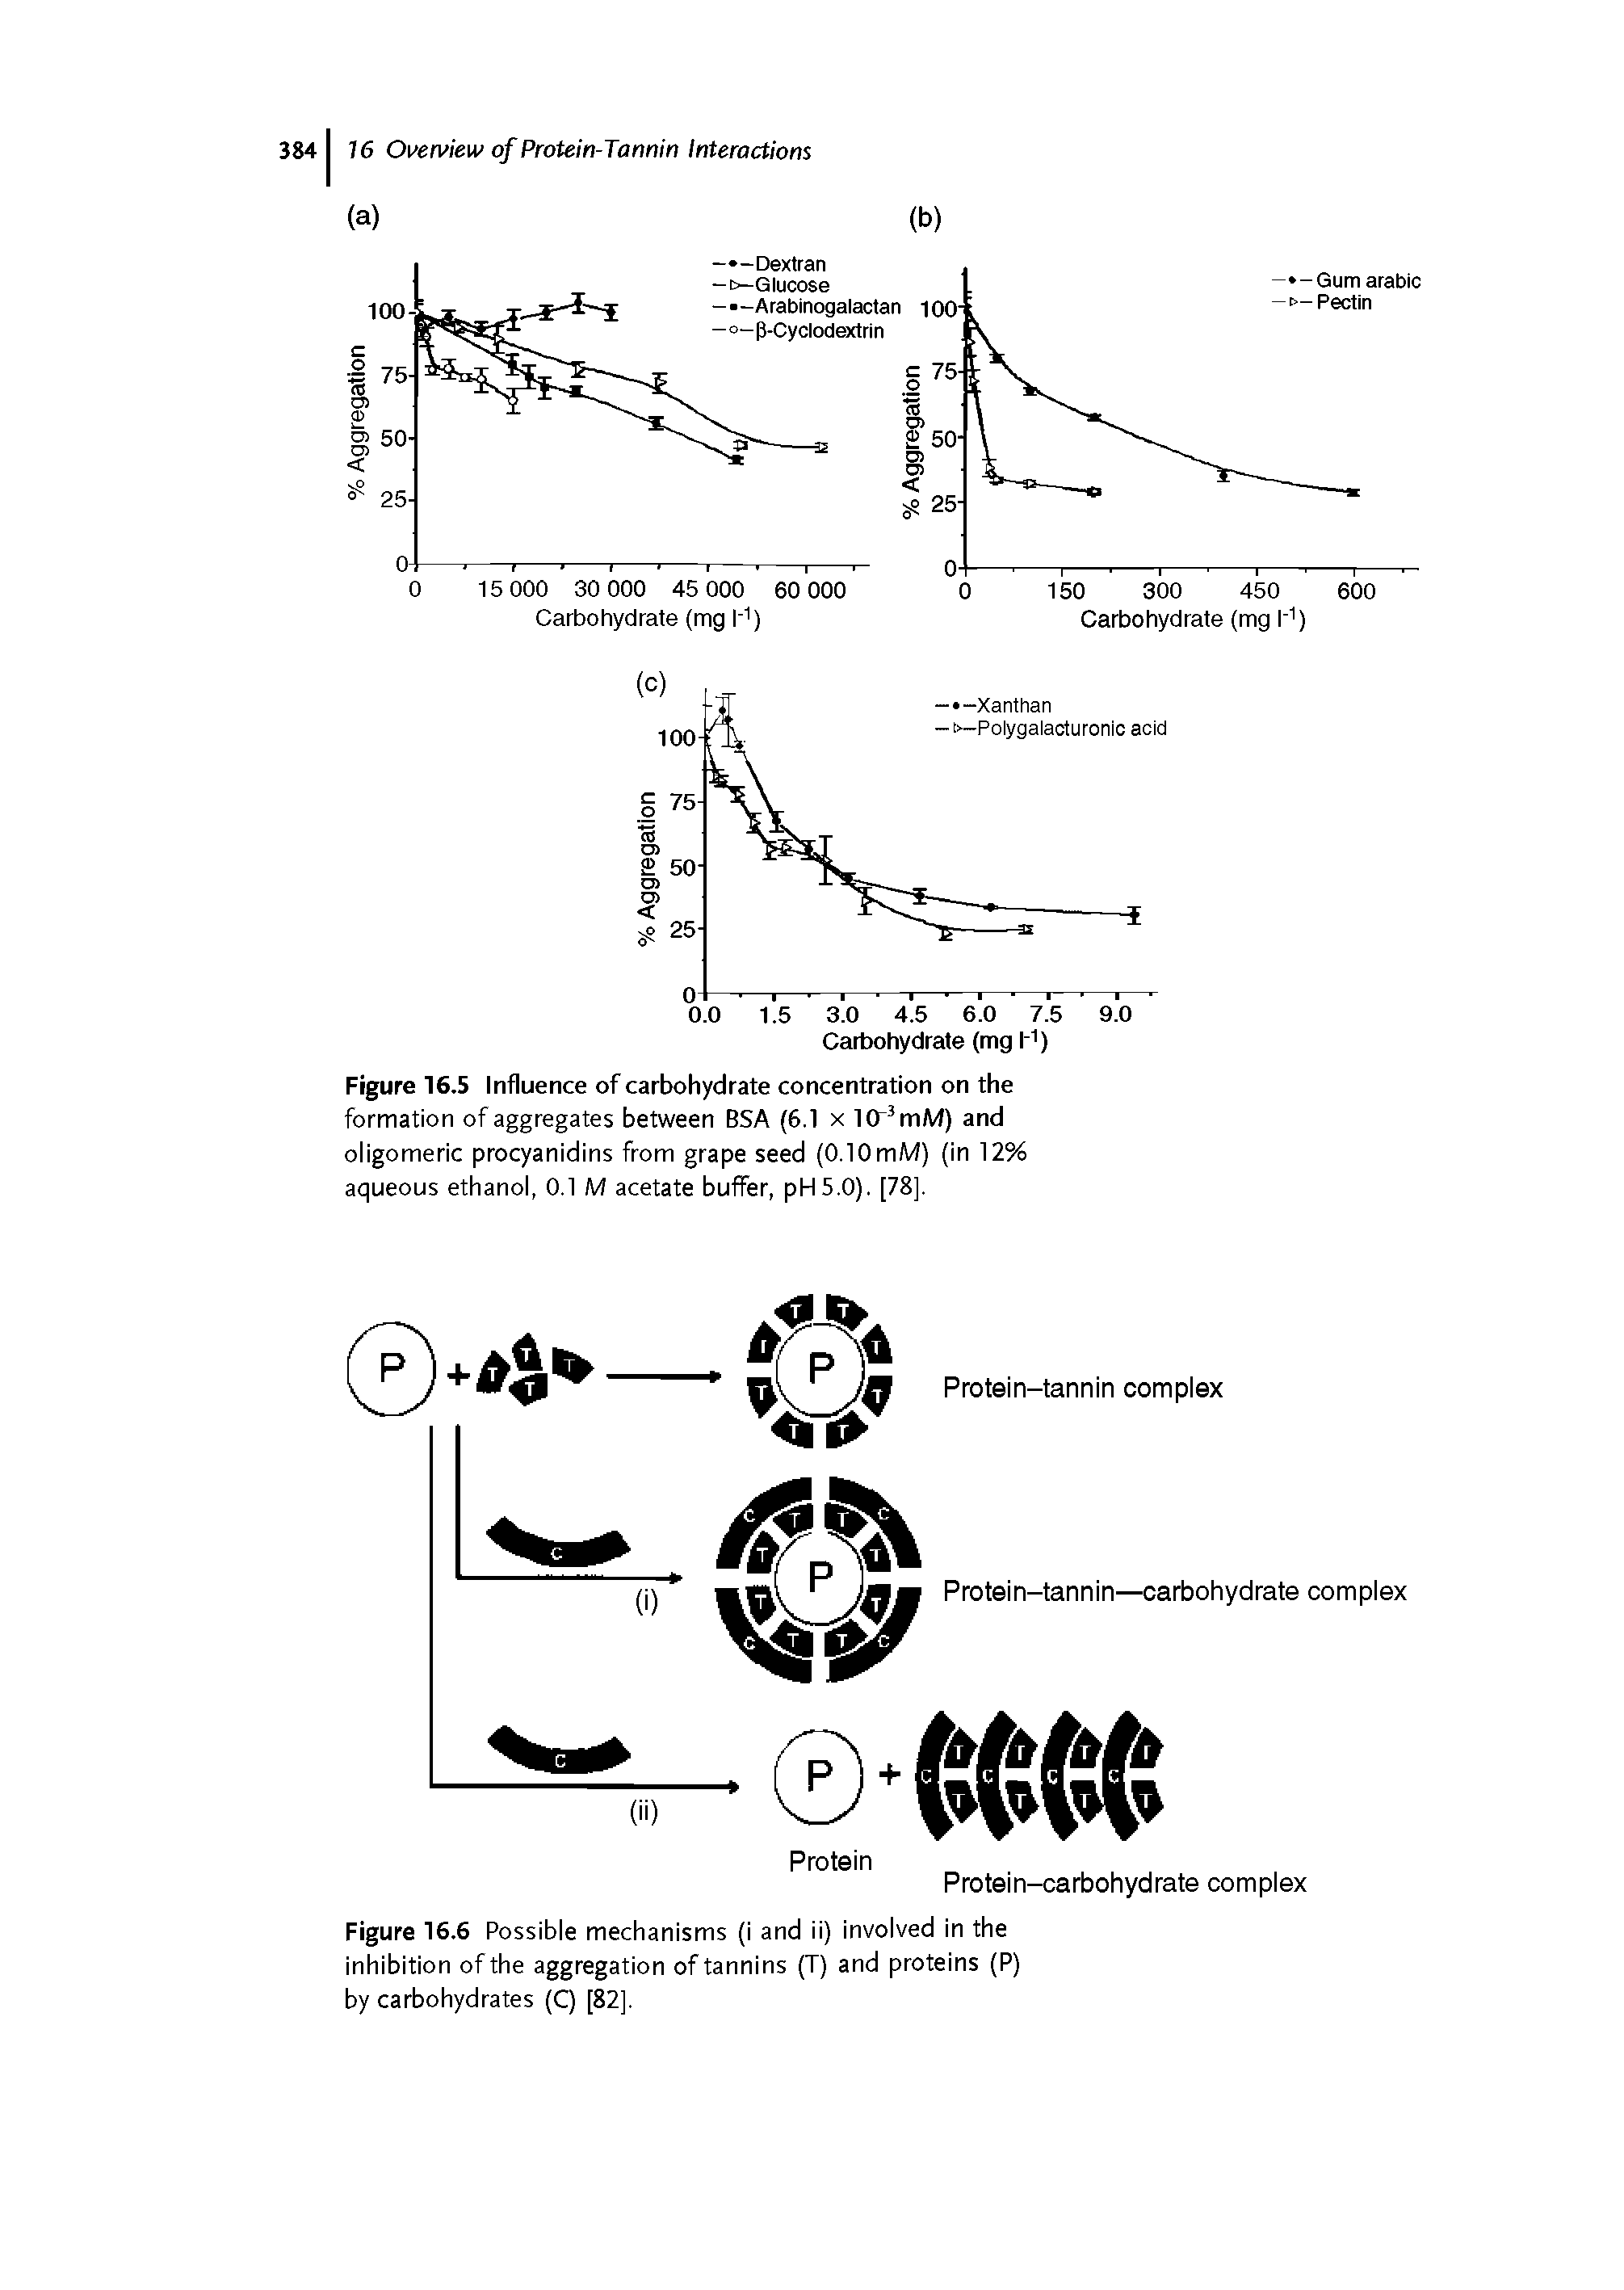 Figure 16.6 Possible mechanisms (i and ii) involved in the inhibition of the aggregation of tannins (T) and proteins (P) by carbohydrates (C) [82],...